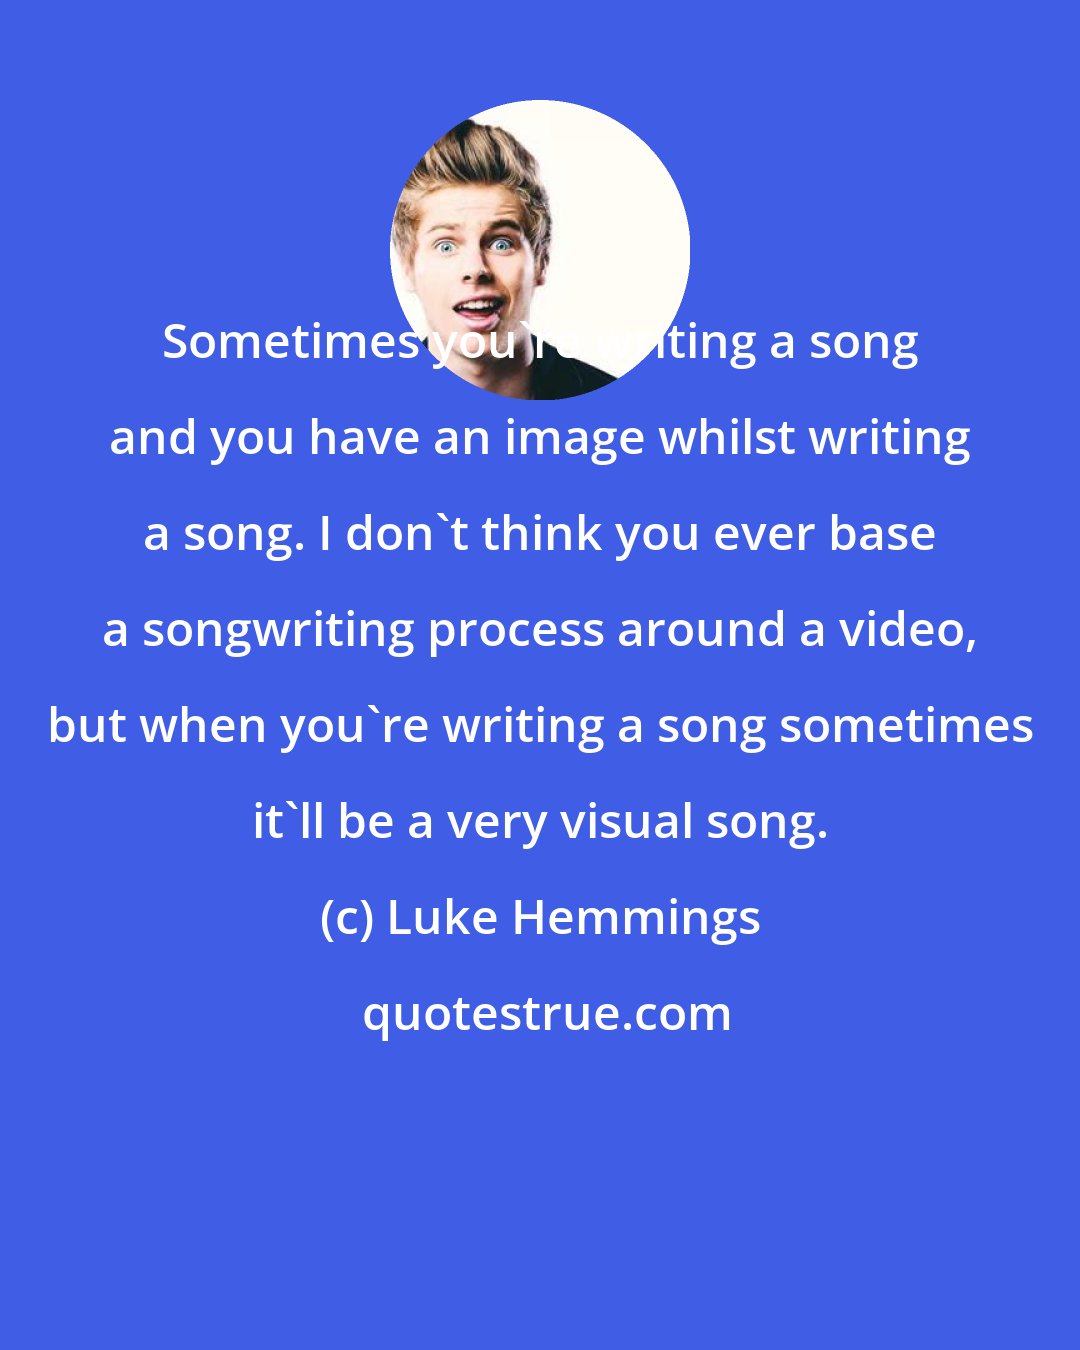 Luke Hemmings: Sometimes you're writing a song and you have an image whilst writing a song. I don't think you ever base a songwriting process around a video, but when you're writing a song sometimes it'll be a very visual song.